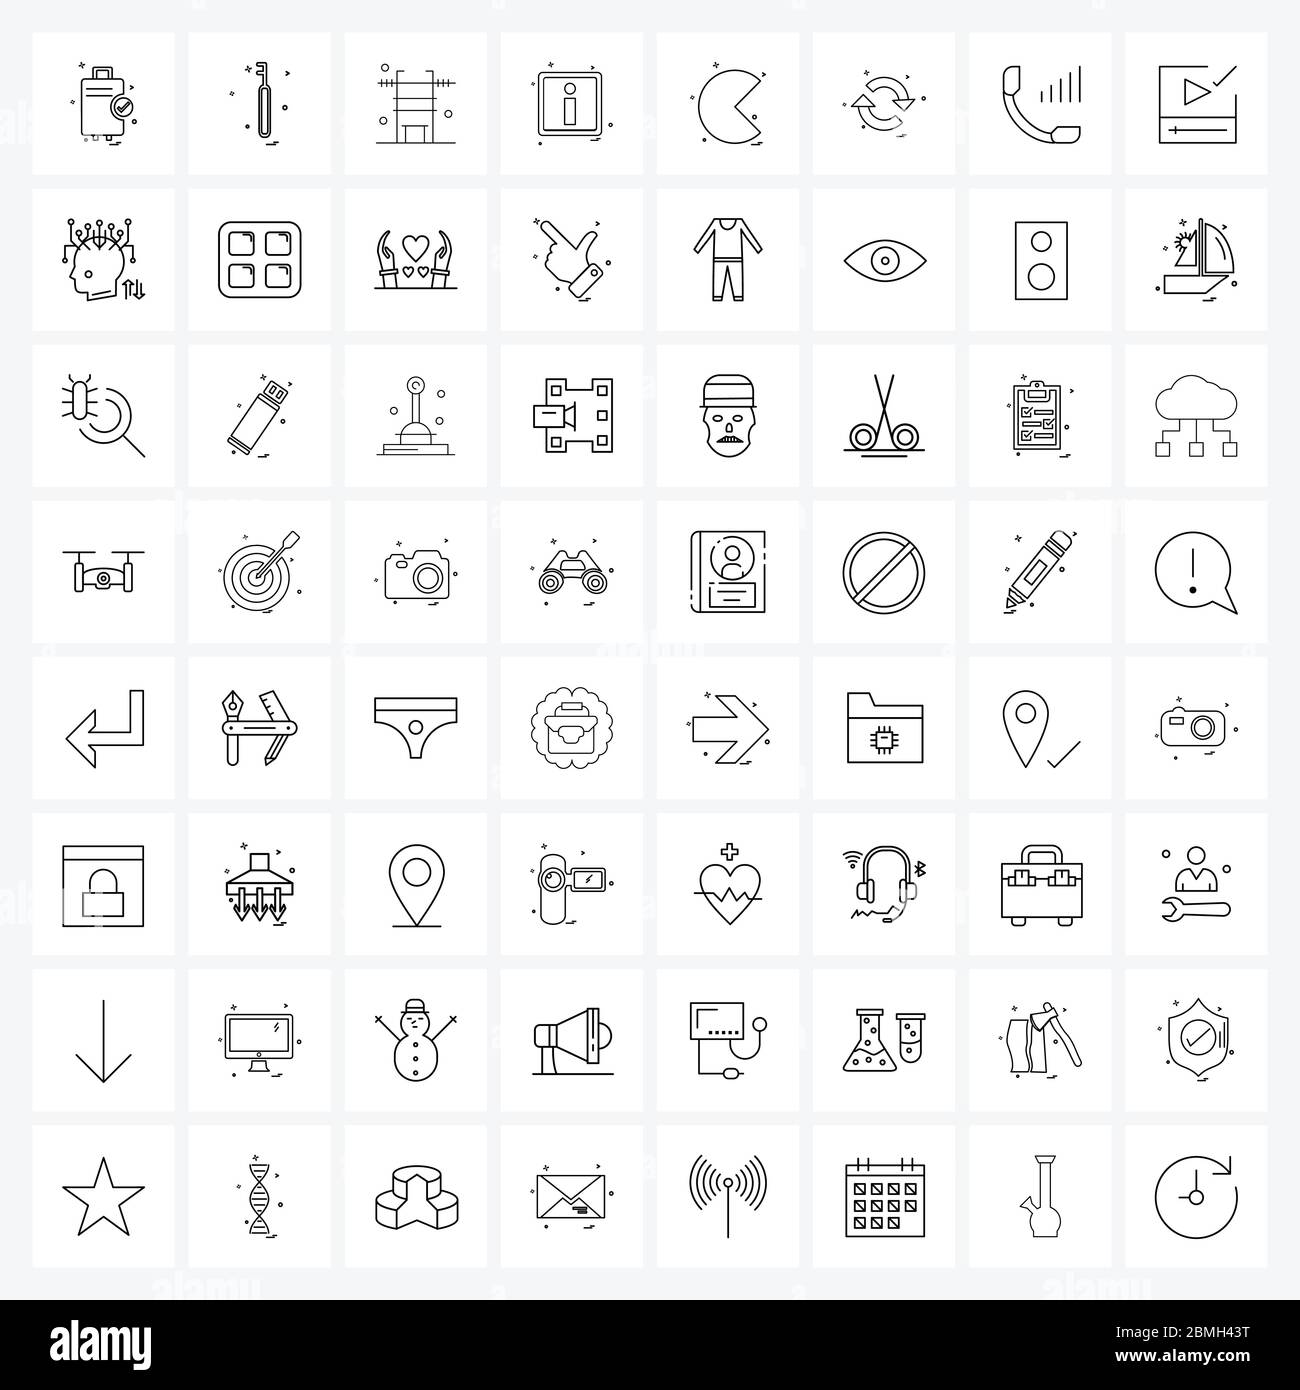 Isolated Symbols Set of 64 Simple Line Icons of graph, button, diet, user interface, sport Vector Illustration Stock Vector